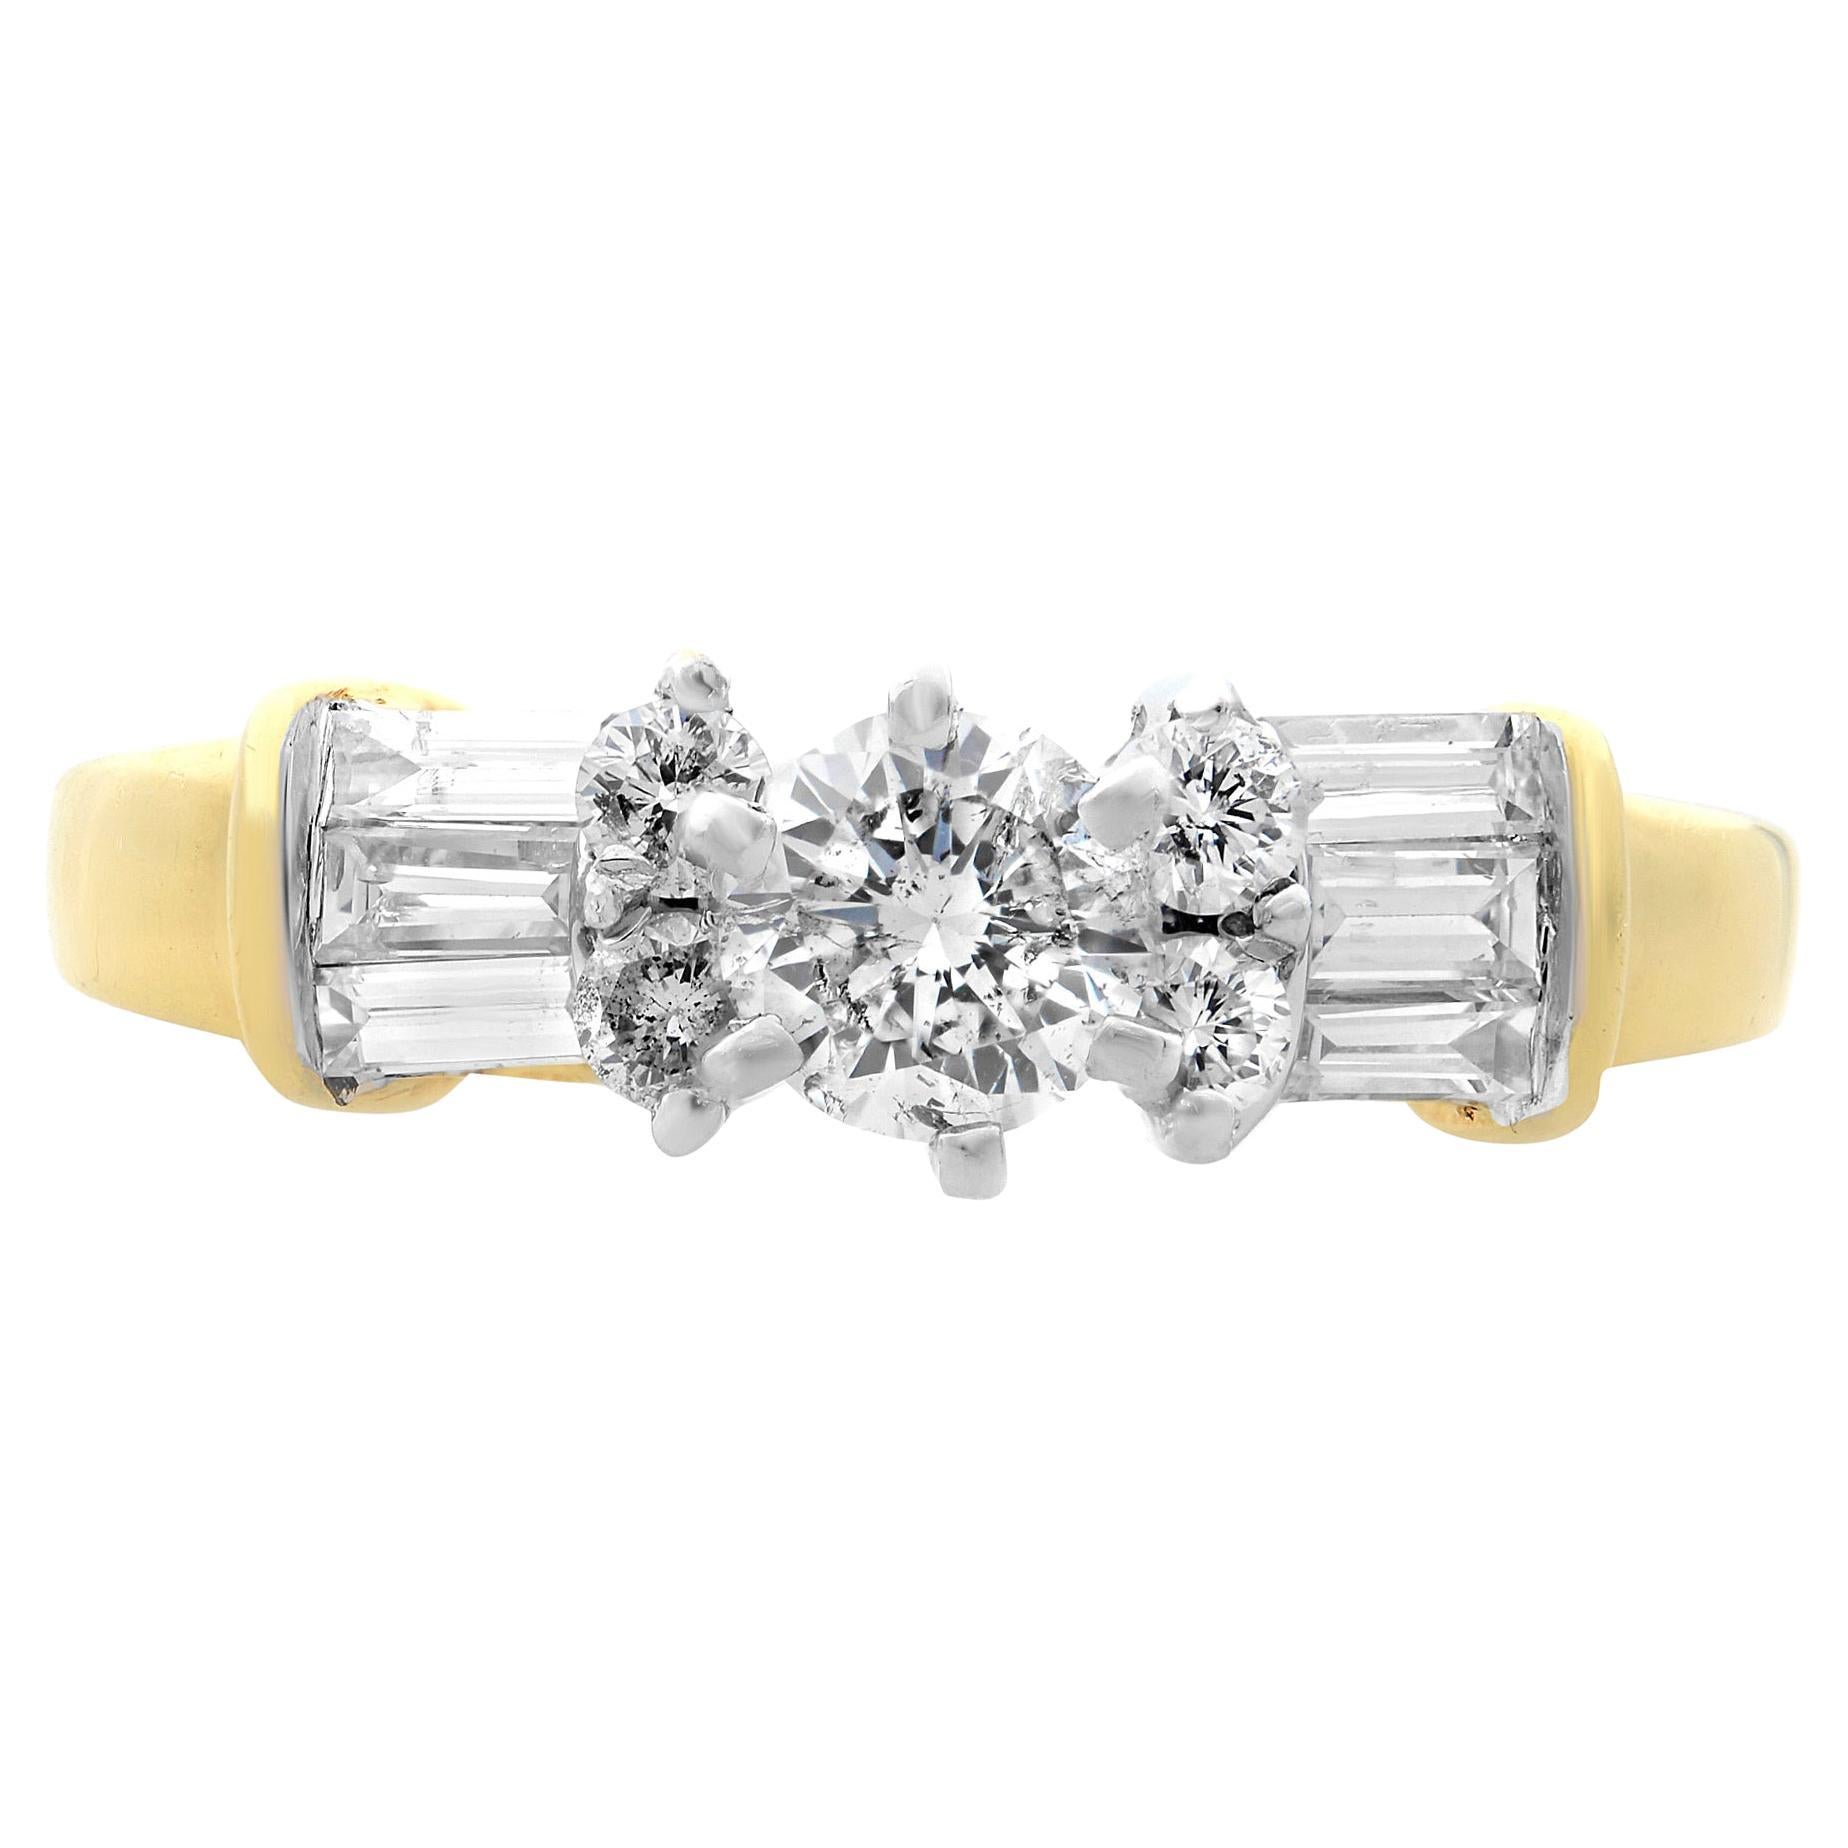 1.00Cttw Round & Baguette Cut Diamond Engagement Ring 14K Yellow Gold For Sale